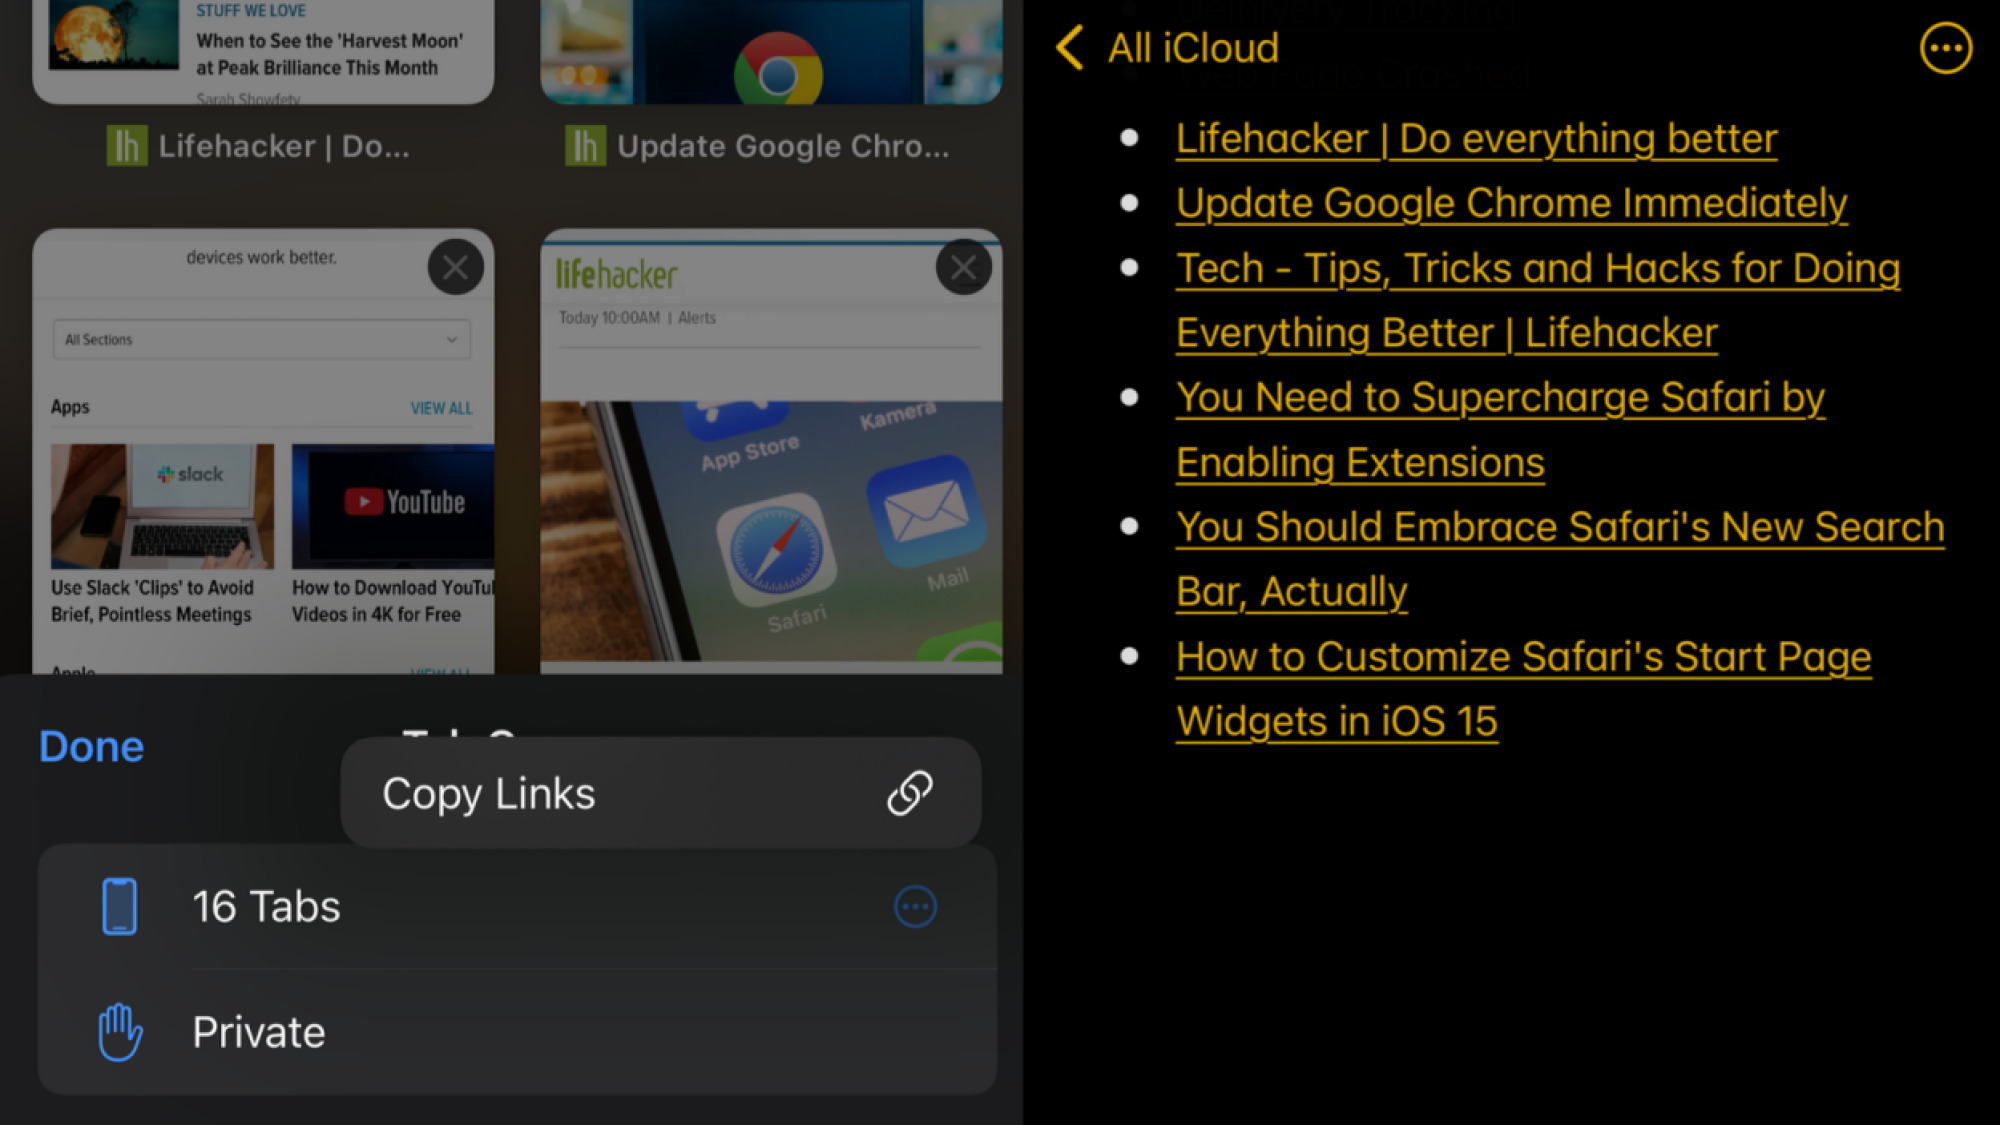 A screenshot showing 16 open tabs in Safari on an iPhone, with the Copy Links button visible on the left. The right side has the Notes app open, with all the copied links pasted in a new note.